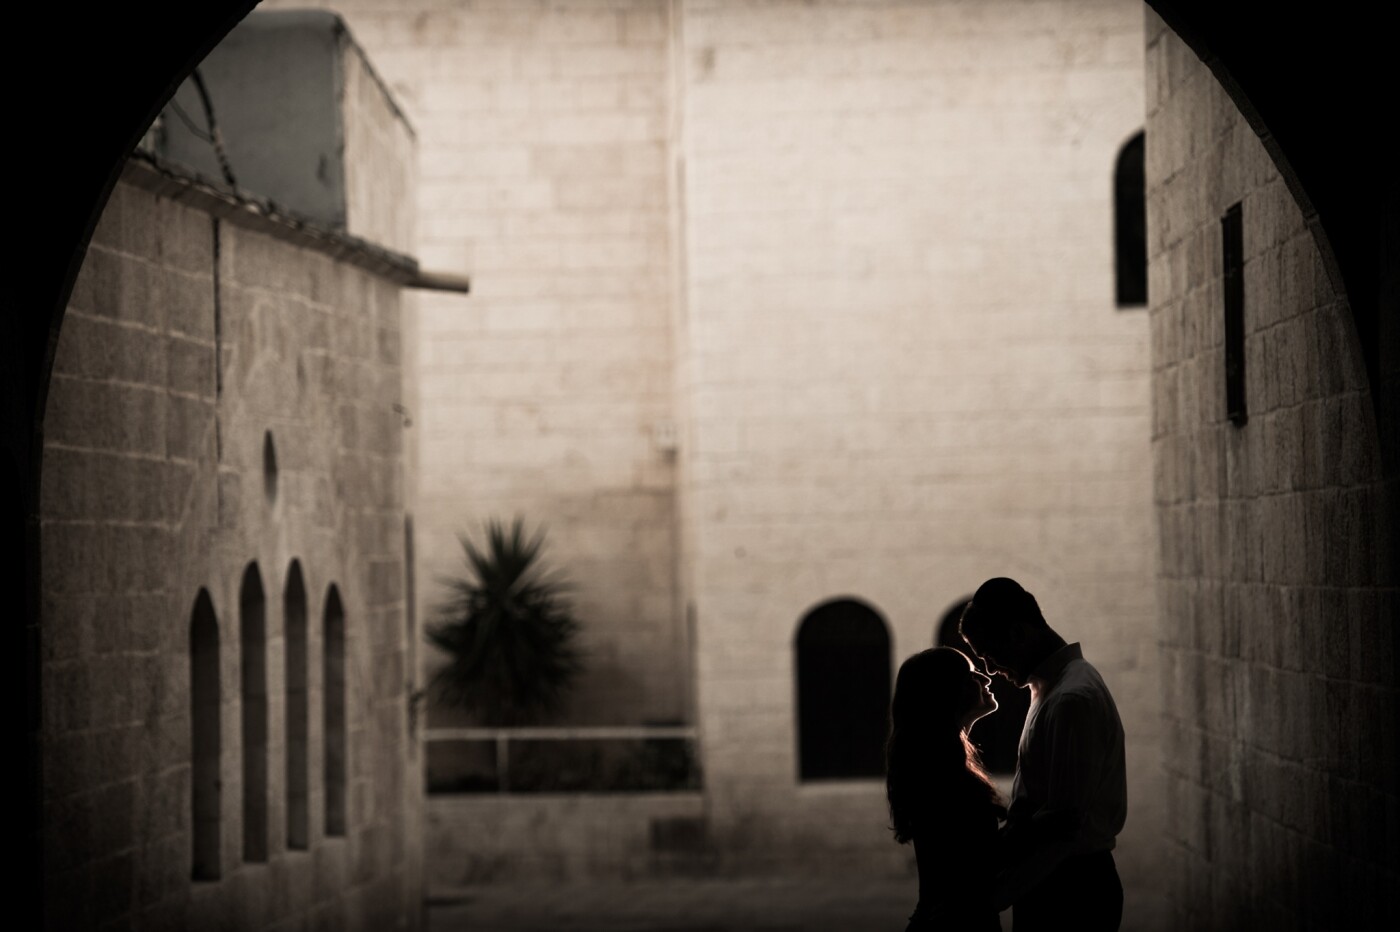 I adore the Old City of Jerusalem. It has some of my favorite spots for photo shoots. But during the busy mid-afternoon, it can come with the challenge of finding a location with the right lighting and no bustling crowds. This tunnel ended up giving me all that and a natural vignette. The look of love in the couple's eyes was the only other thing I needed to make this shot one of my all-time favorites.